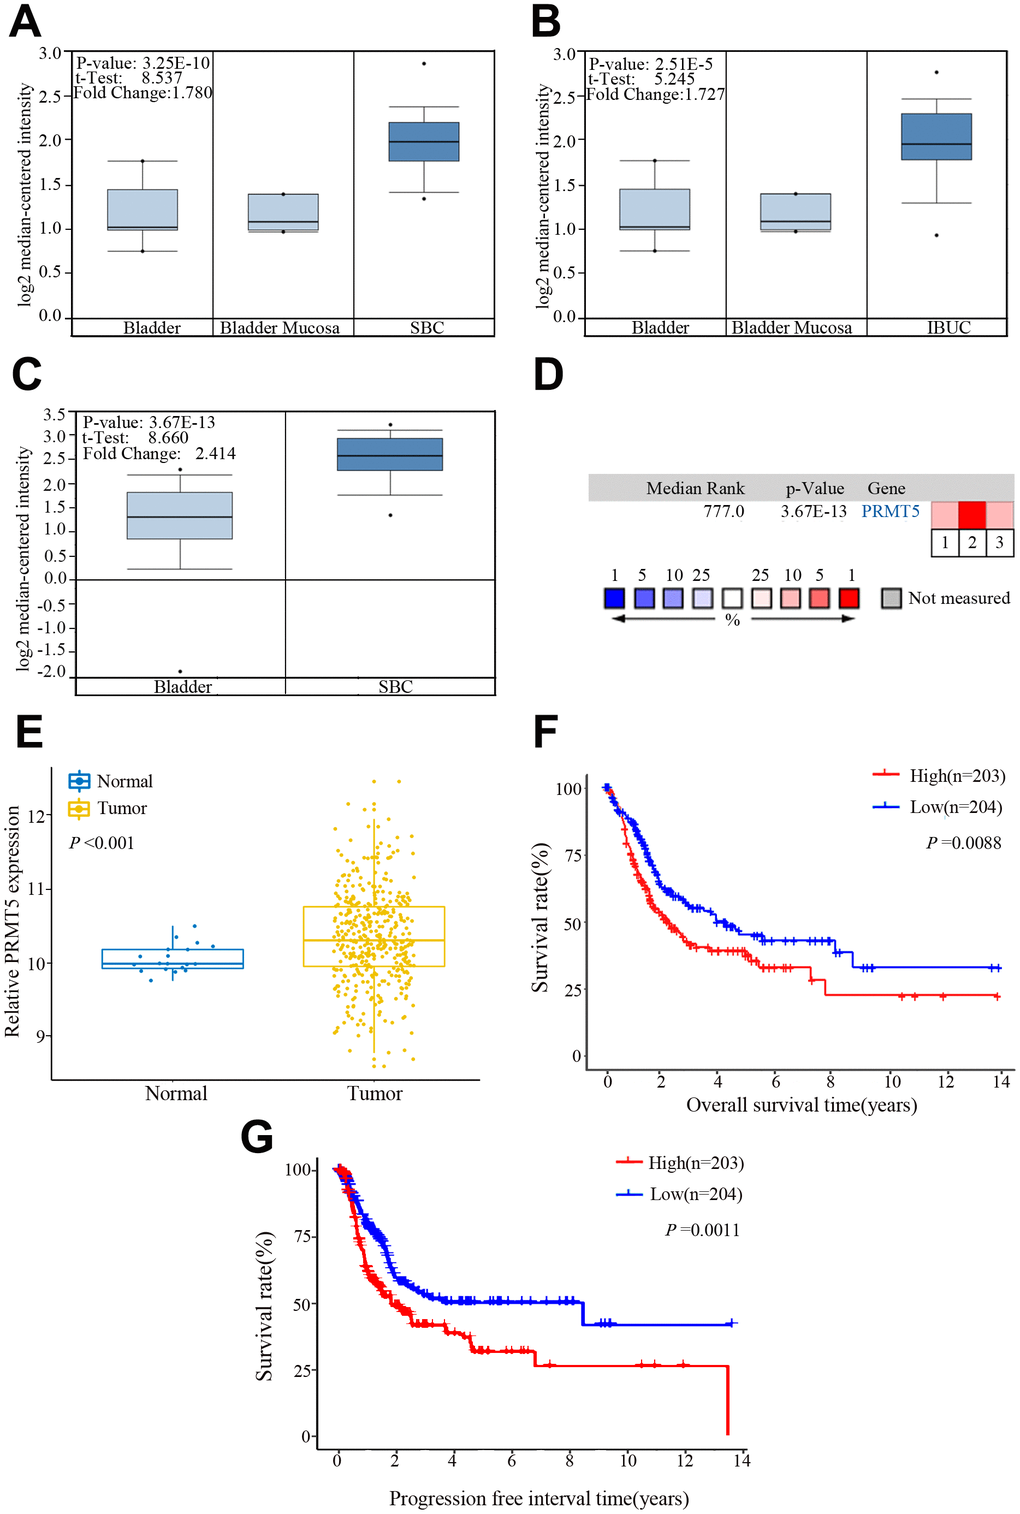 PRMT5 expression in bladder cancer in the Oncomine and The Cancer Genome Atlas (TCGA) databases. (A–C) Comparison of the PRMT5 expression levels in the Dyrskjot Bladder 3 and Sanchez-Carbayo Bladder 2 data sets of the Oncomine database. The threshold: P value: 1E-4, fold change: 1.5, gene rank: 10%. (D) A median-ranked analysis of the Dyrskjot Bladder 3 (1, 2) and Sanchez-Carbayo Bladder 2 (3) data sets from the Oncomine database. The colored squares revealed the median rank for PRMT5 across the three analyses (vs normal tissue). (E) Comparison of the PRMT5 expression level in bladder cancer and the normal tissue from the TCGA database. (F, G) Overall and progression-free survival times in bladder cancer patients with low versus high expression of PRMT5 assessed by Kaplan-Meier analysis from the TCGA cohorts. SBC: superficial bladder cancer, IBUC: infiltrating bladder urothelial carcinoma.